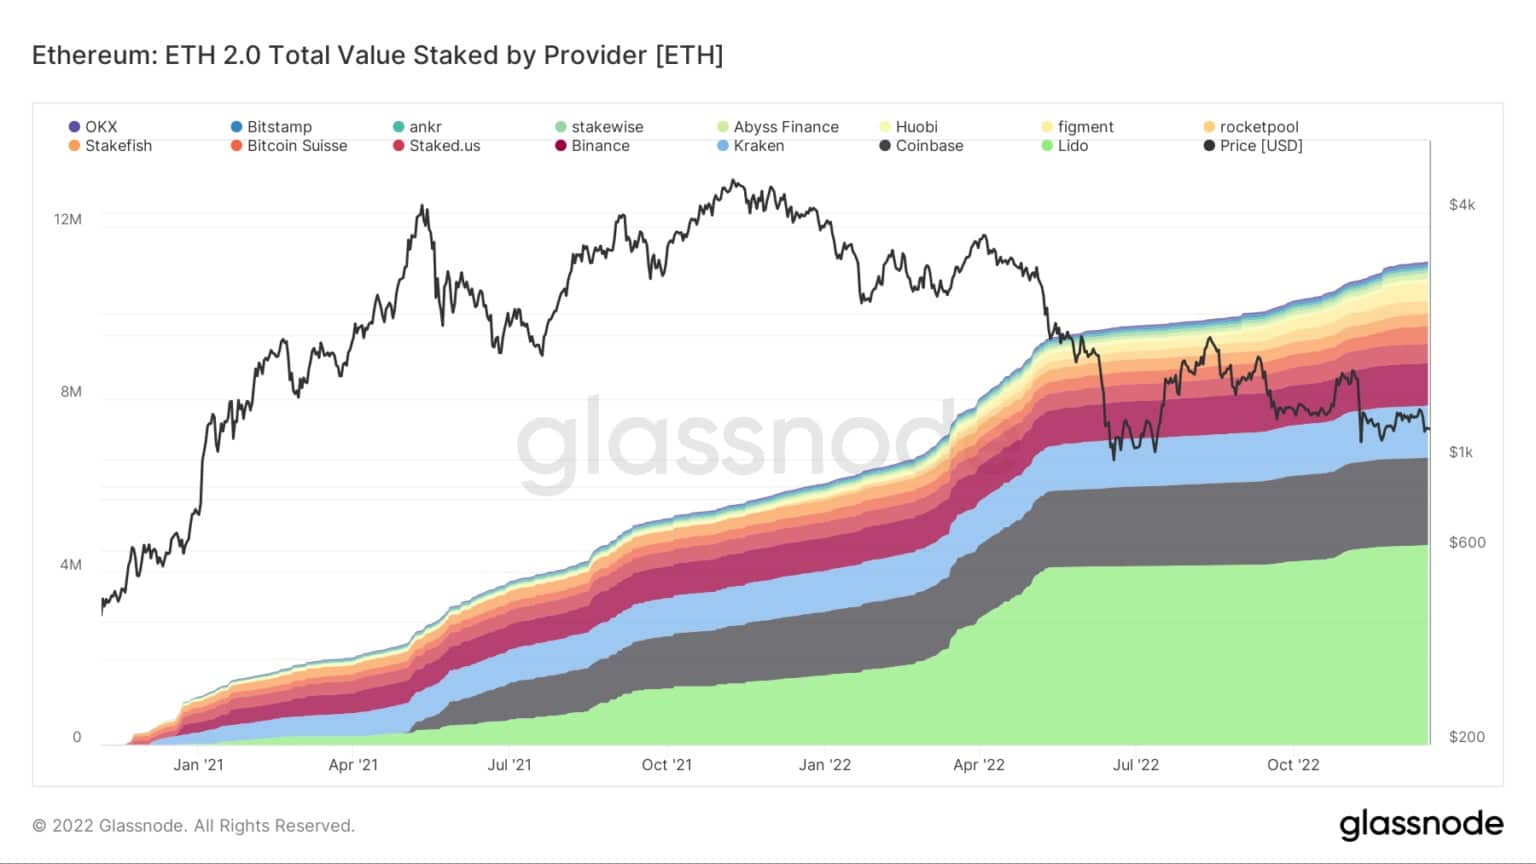 ETH 2.0 Total Value Staked by Provider / Source: Glassnode.com